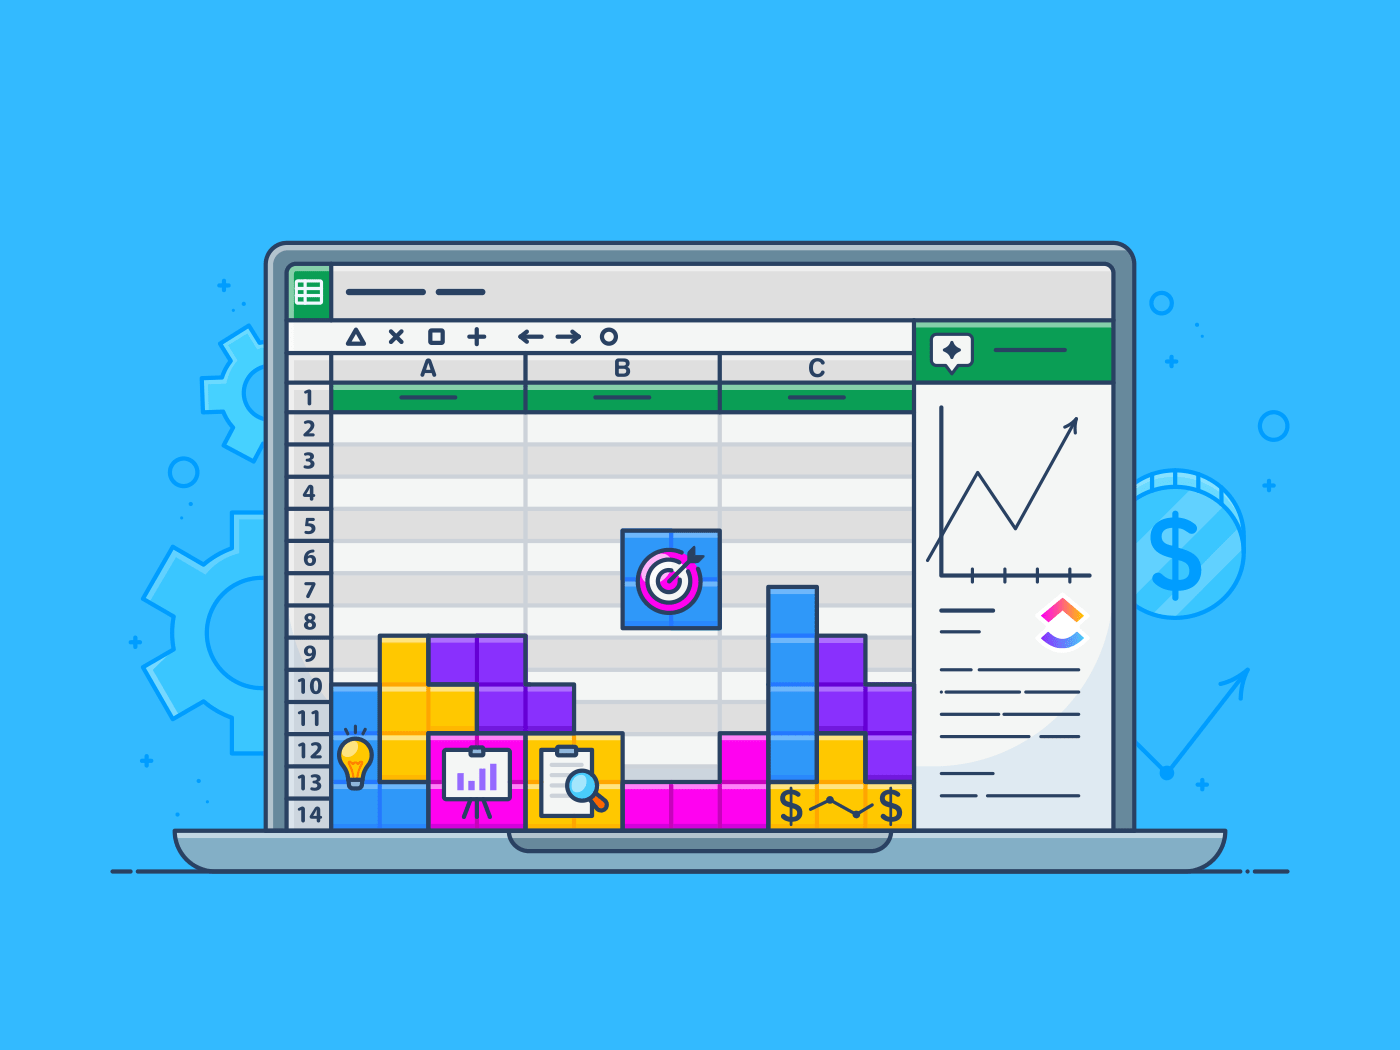 Stylized illustration of a laptop displaying a spreadsheet with various colorful chart elements and financial symbols, indicating data analysis or financial planning activities.